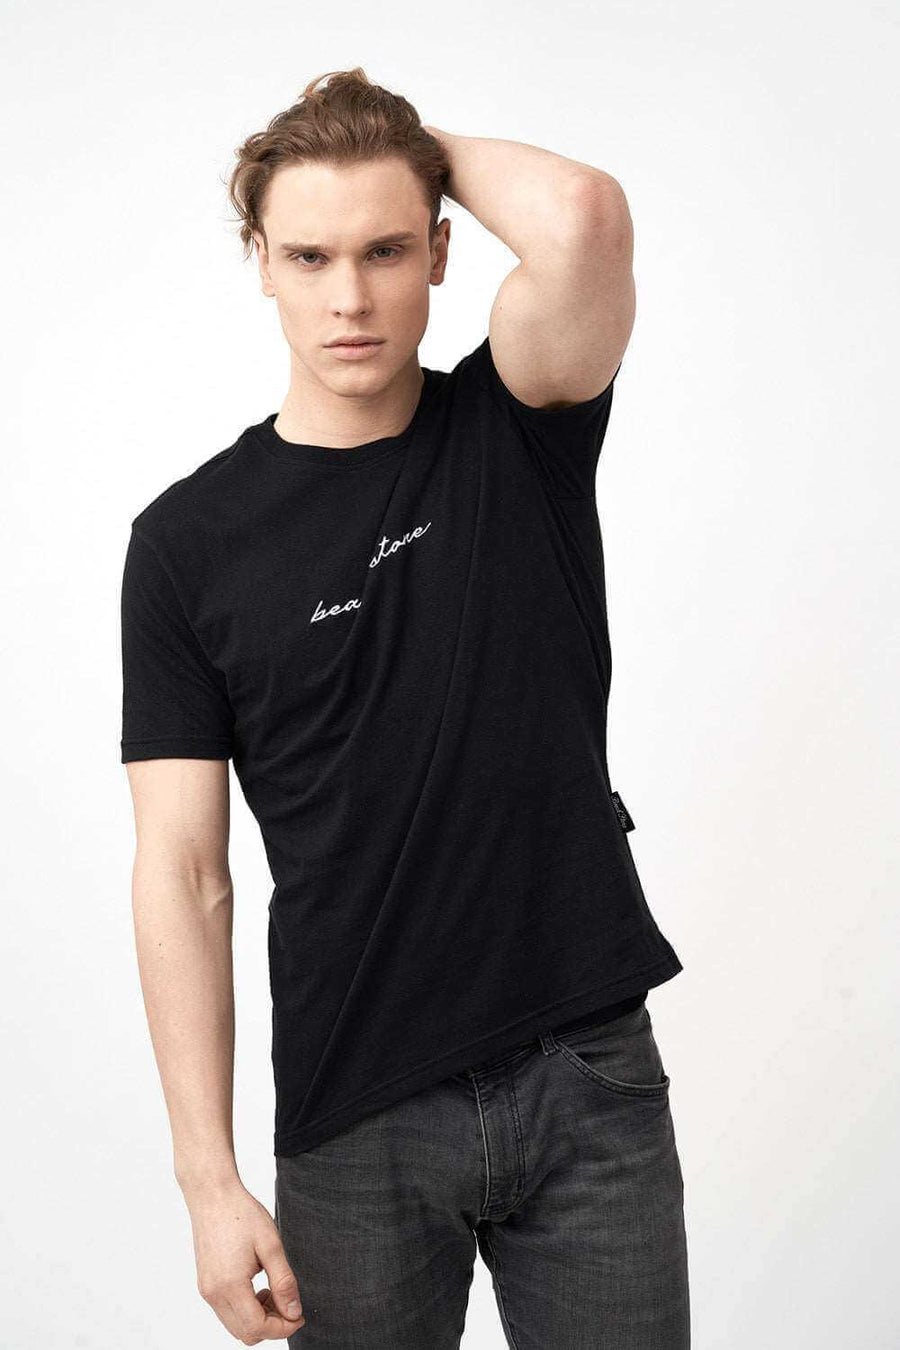 Front Pose of Men's Short Sleeve Shirts in Black with Embroidered Logo